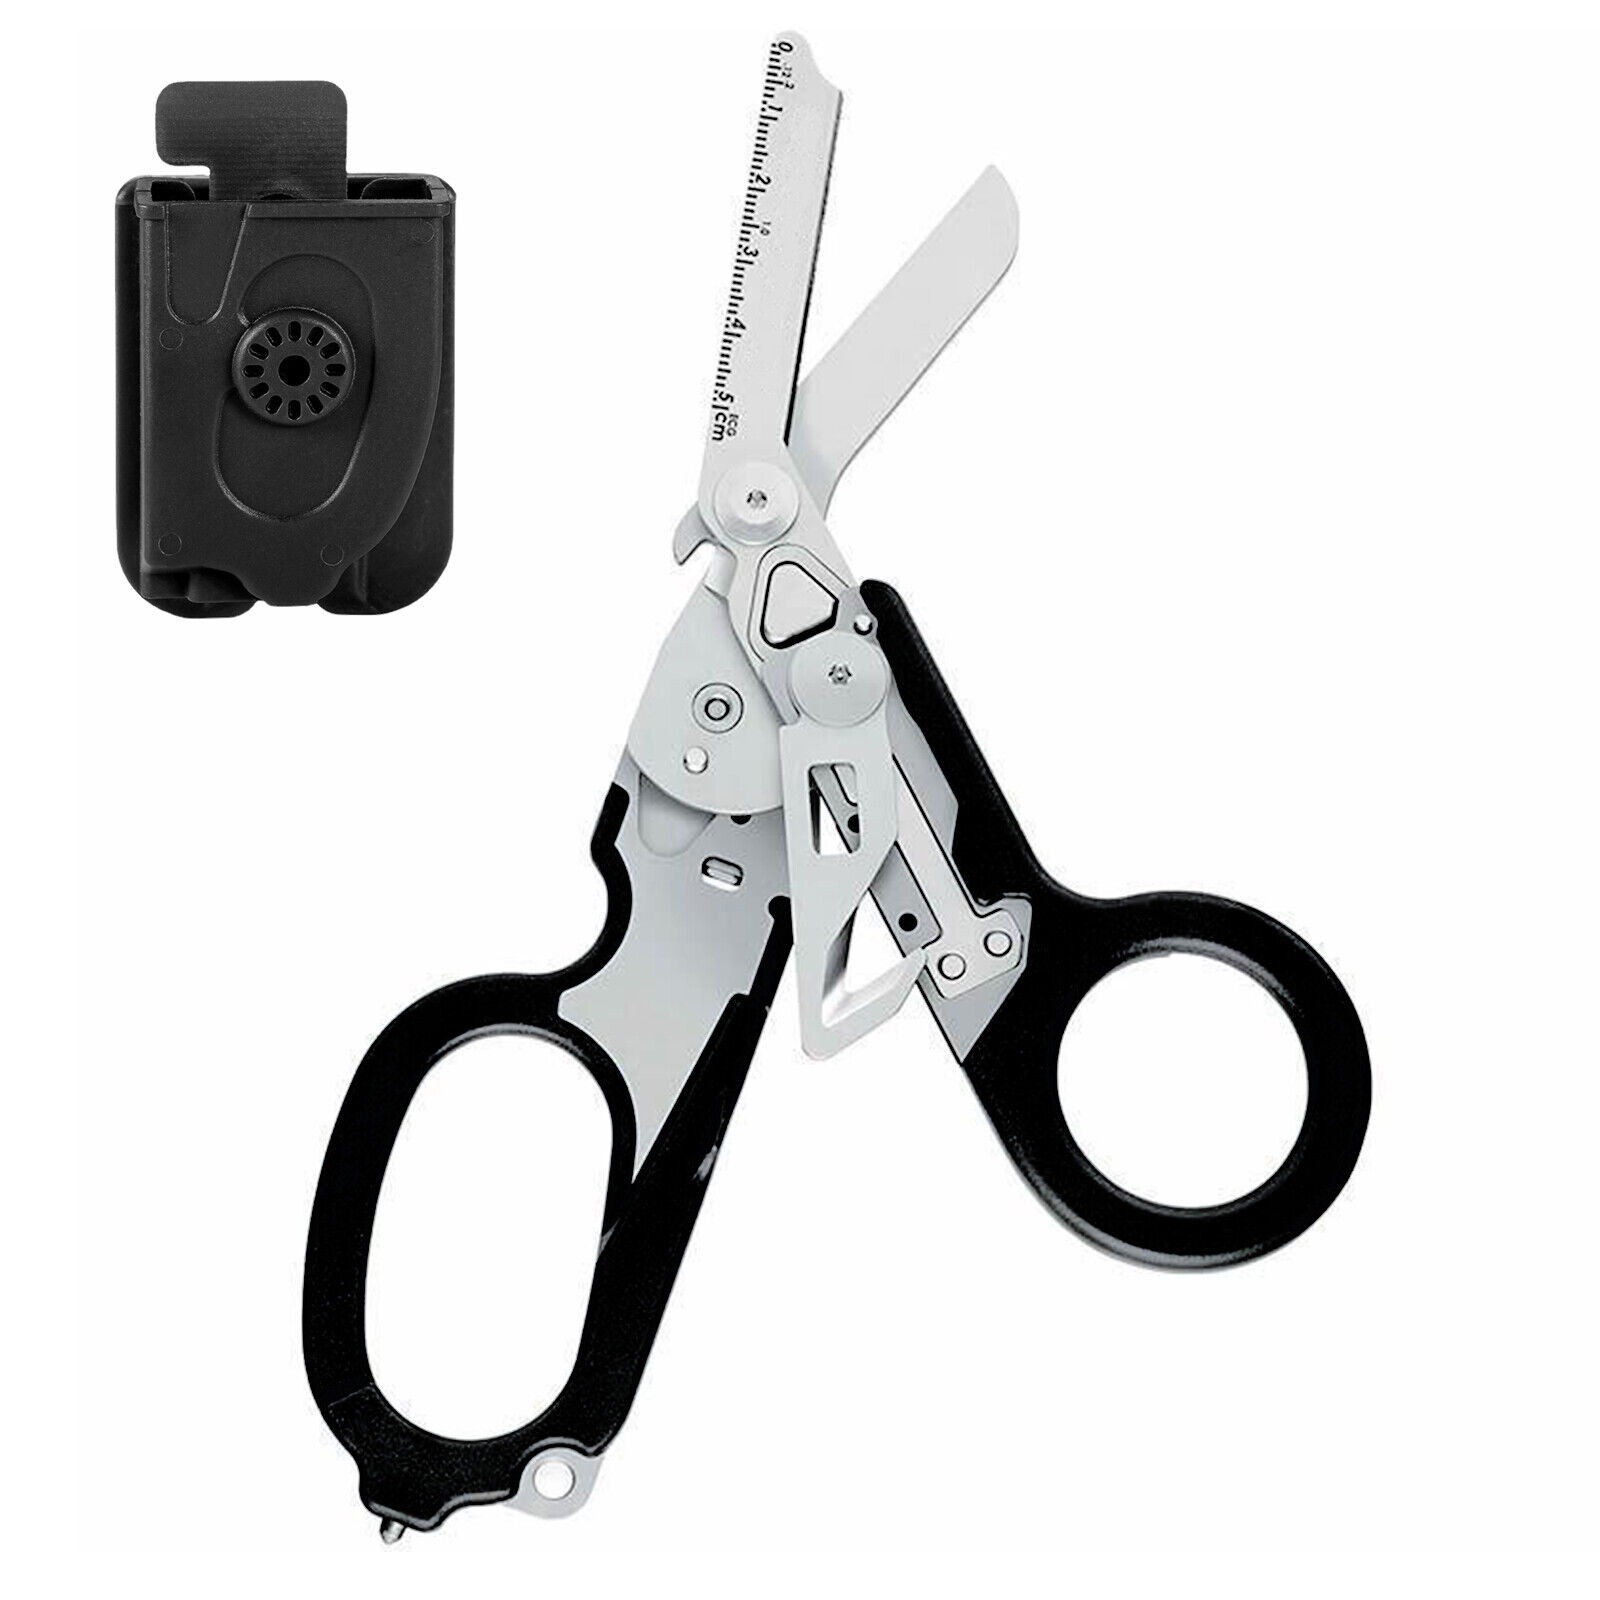 Emergency Response Shears Stainless Steel Trauma Shears with Holster